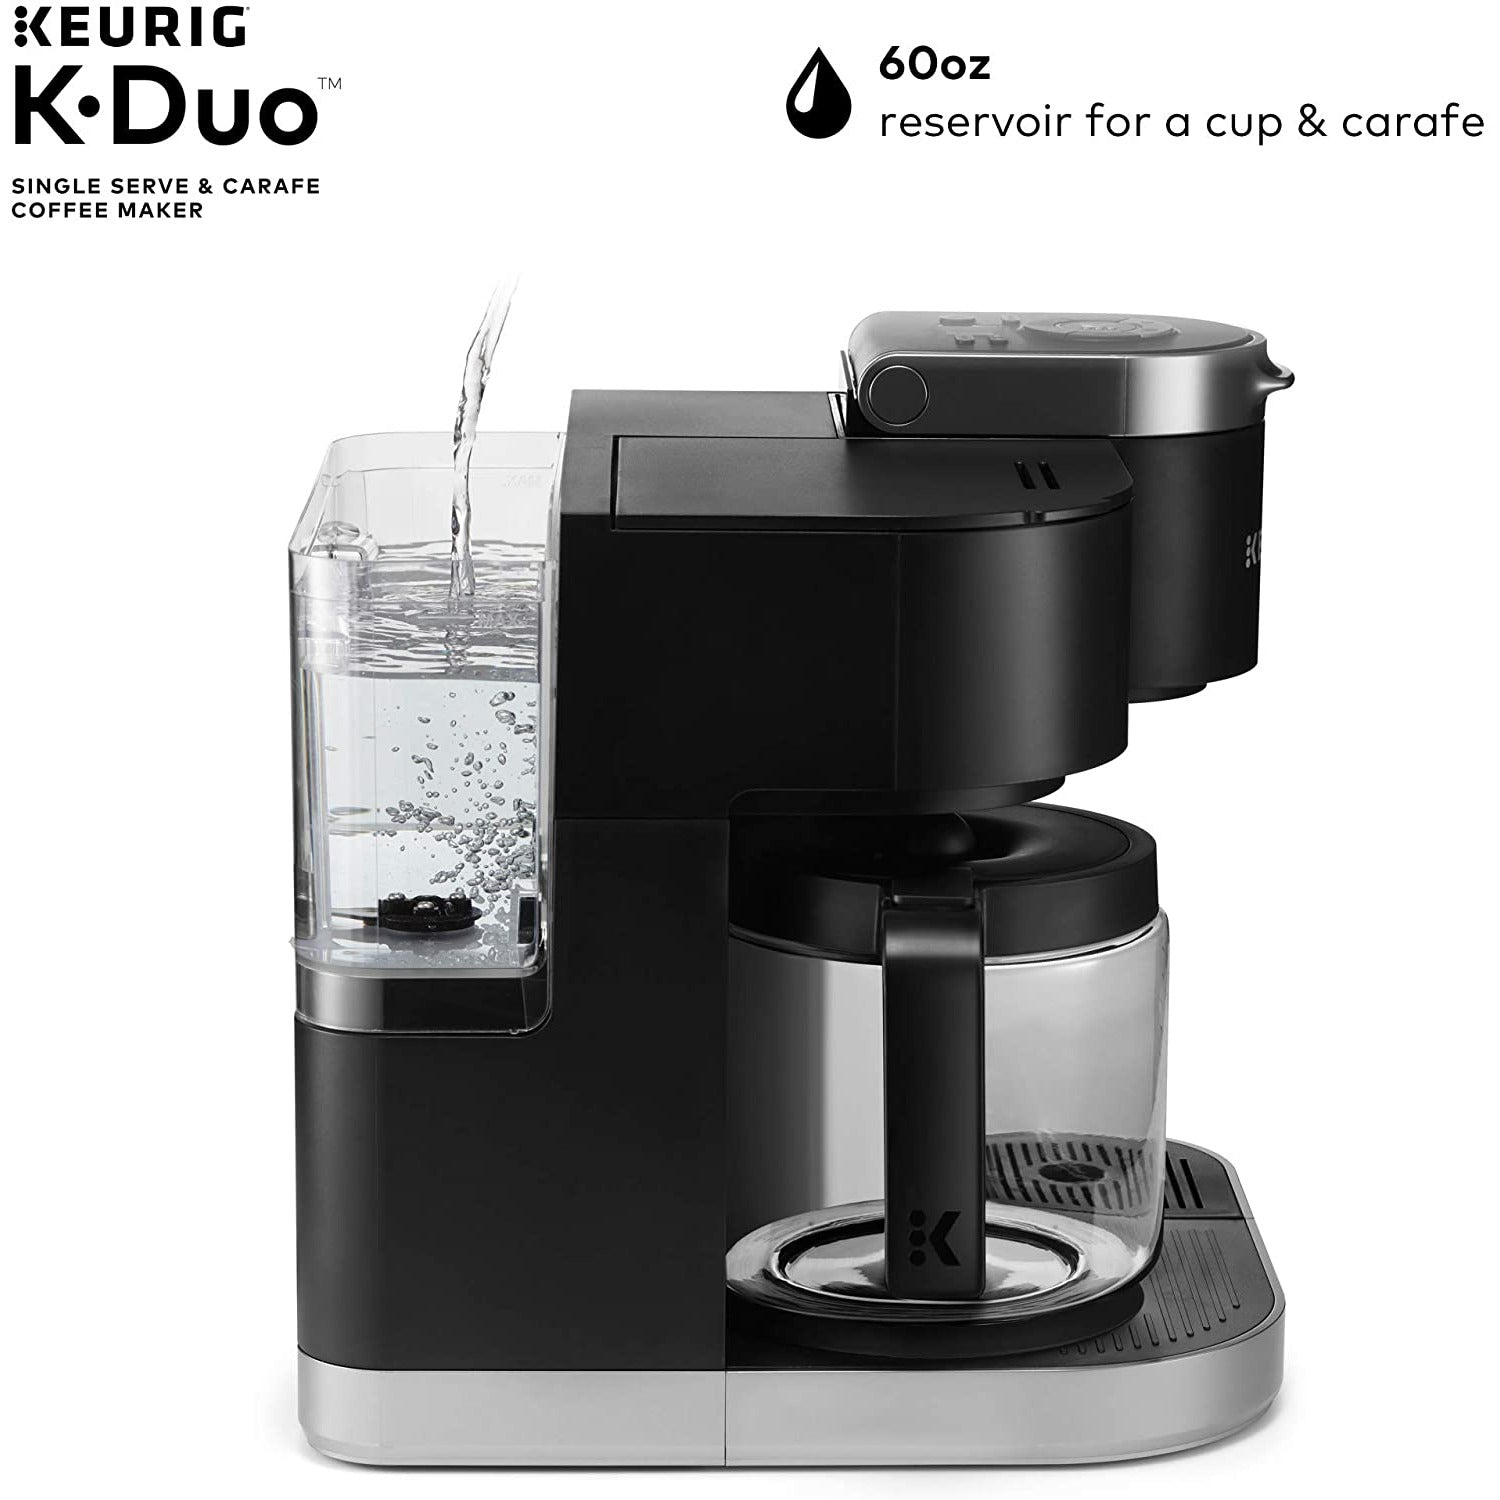 Keurig K-Duo Plus Review: Versatile Machine A 'Wise Choice' For